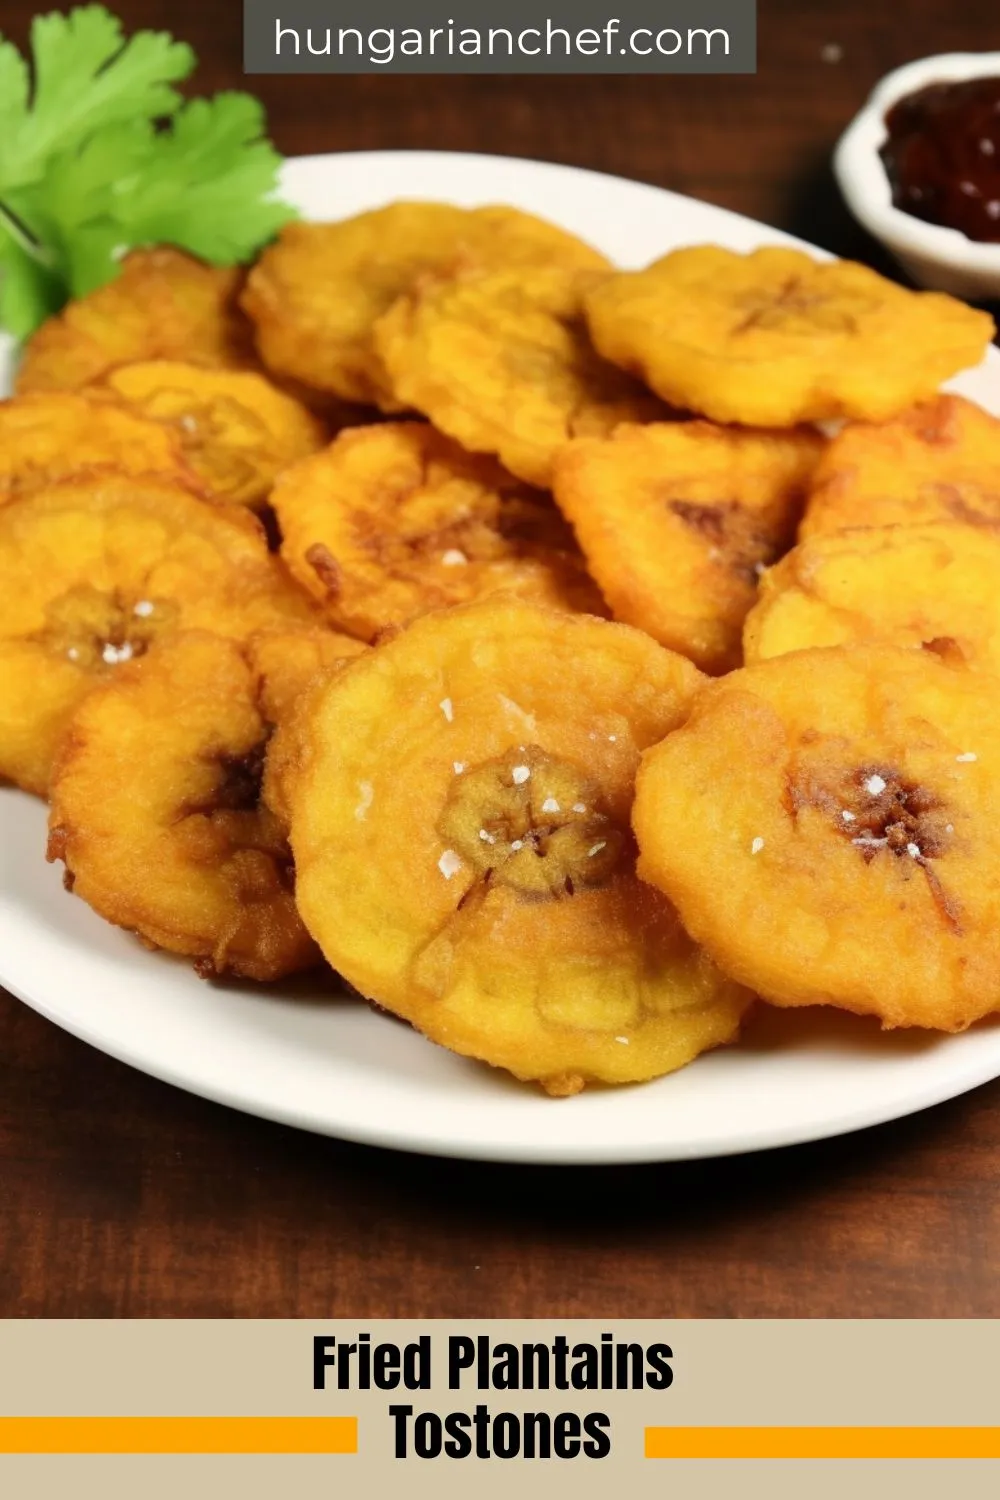 Fried Plantains Tostones